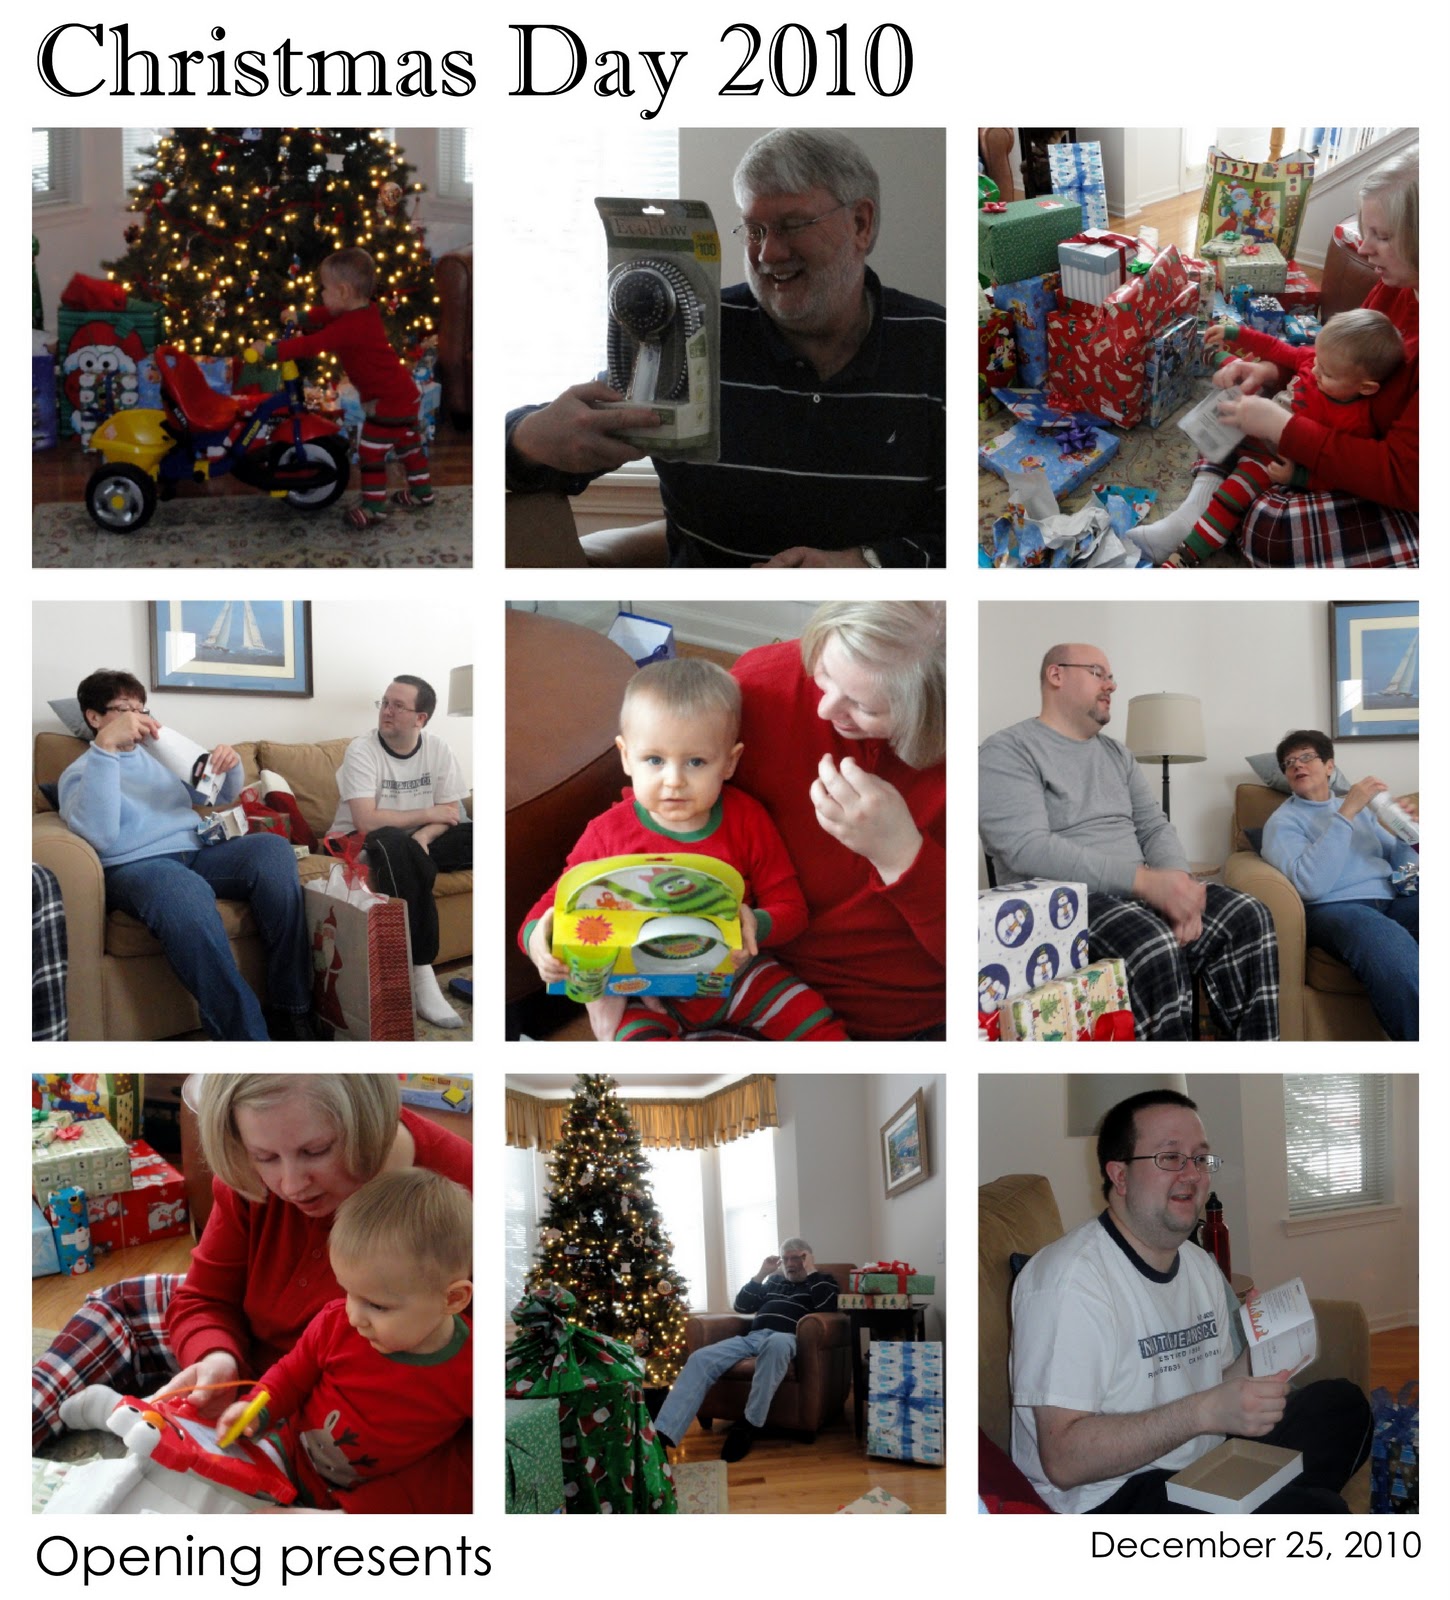 [Christmas Day 2010 - Opening presents - 12.25.10[5].jpg]